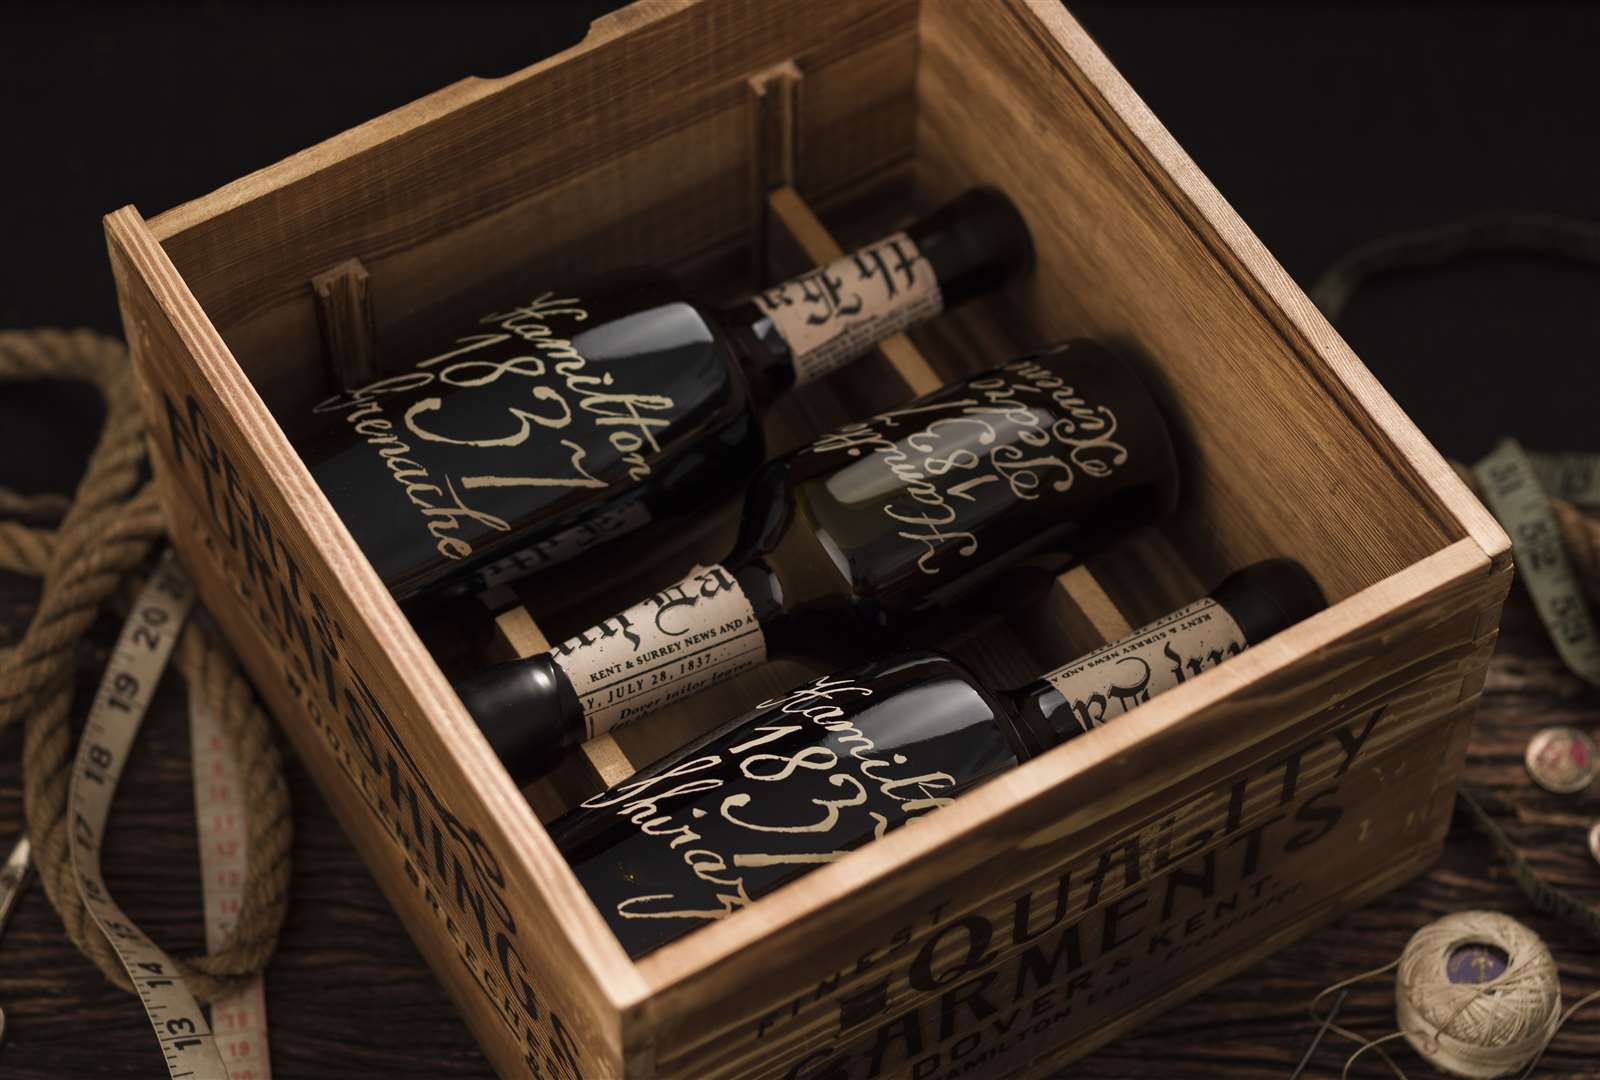 The Bloodline wine - bearing 1837, the date Richard Hamilton arrived Down Under - are presented in cases which reflect the wine's origins. Today it is produced by Hugh Hamilton Wines - run by Richard Hamilton's direct descendants